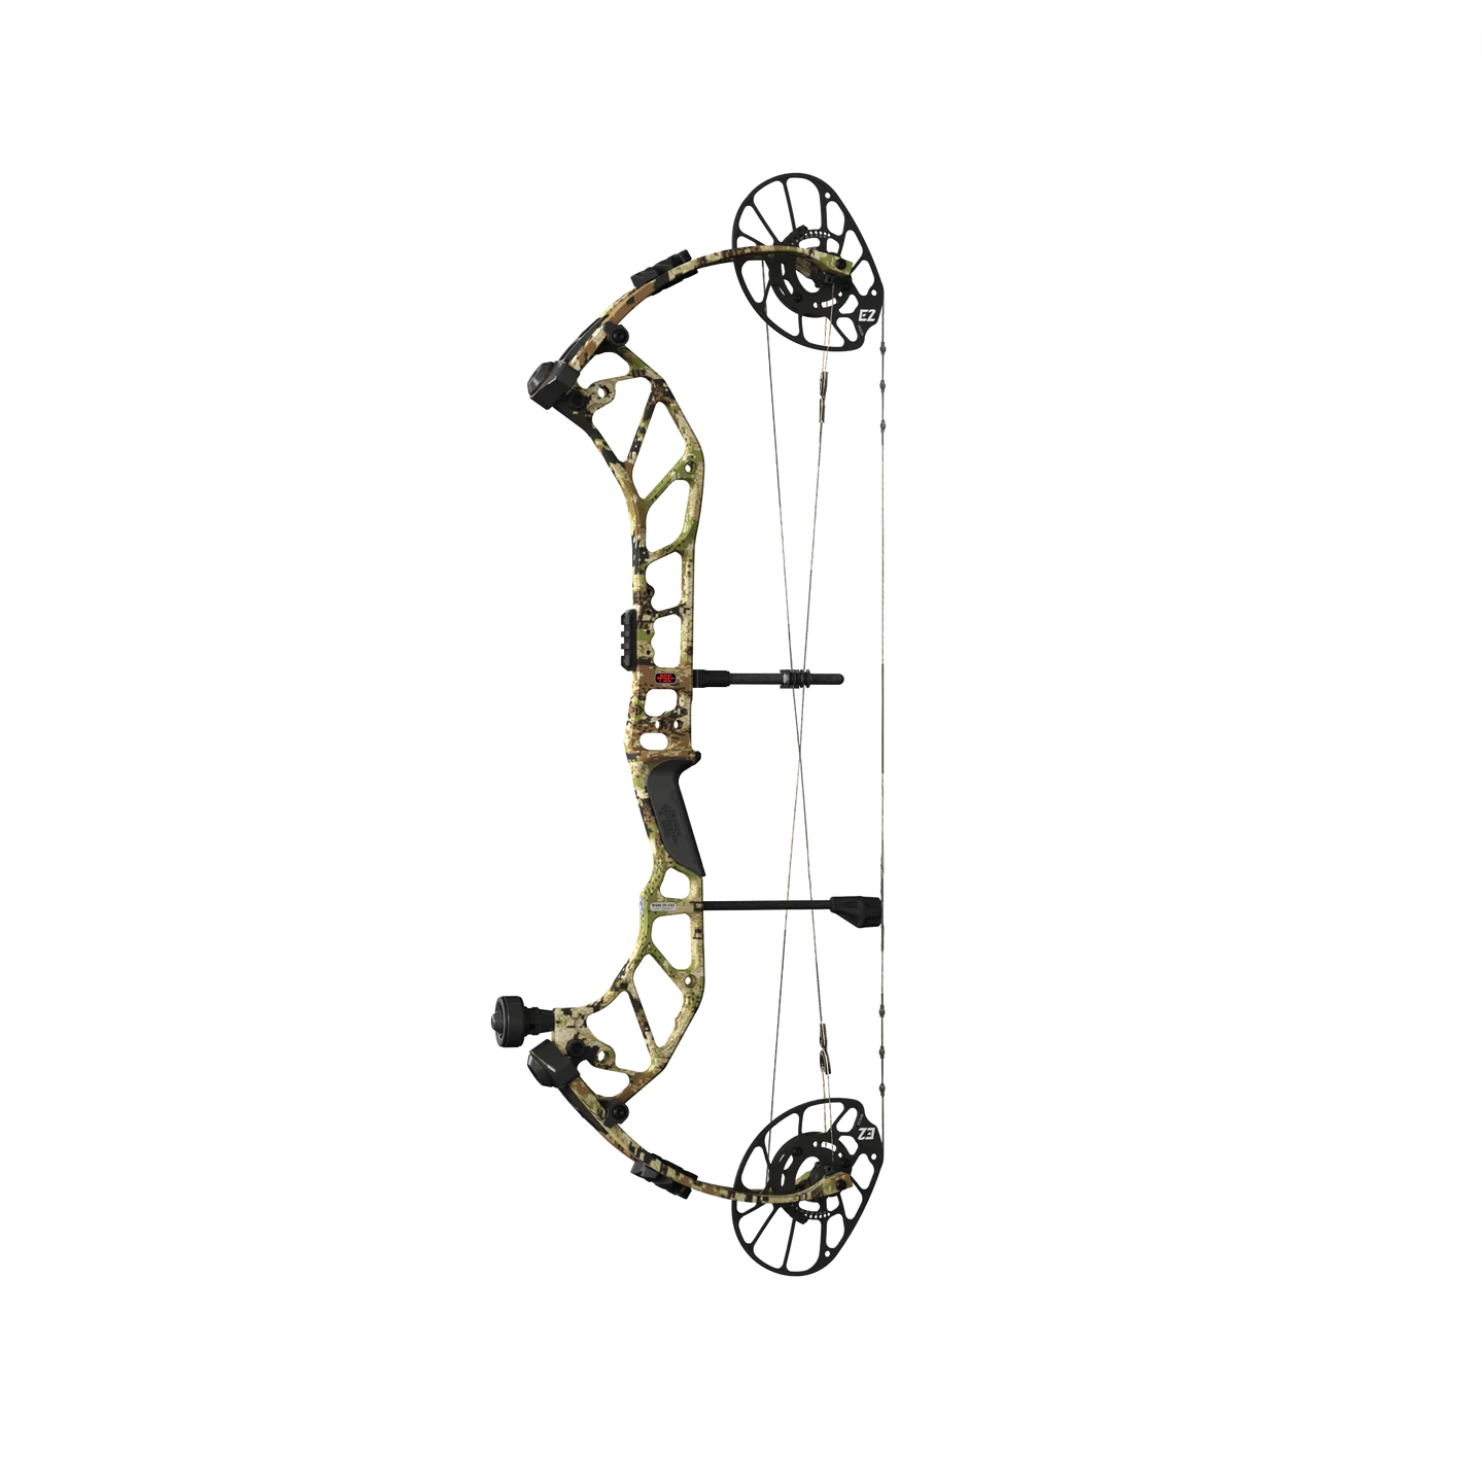 PSE Fortis 30 Compound Bow